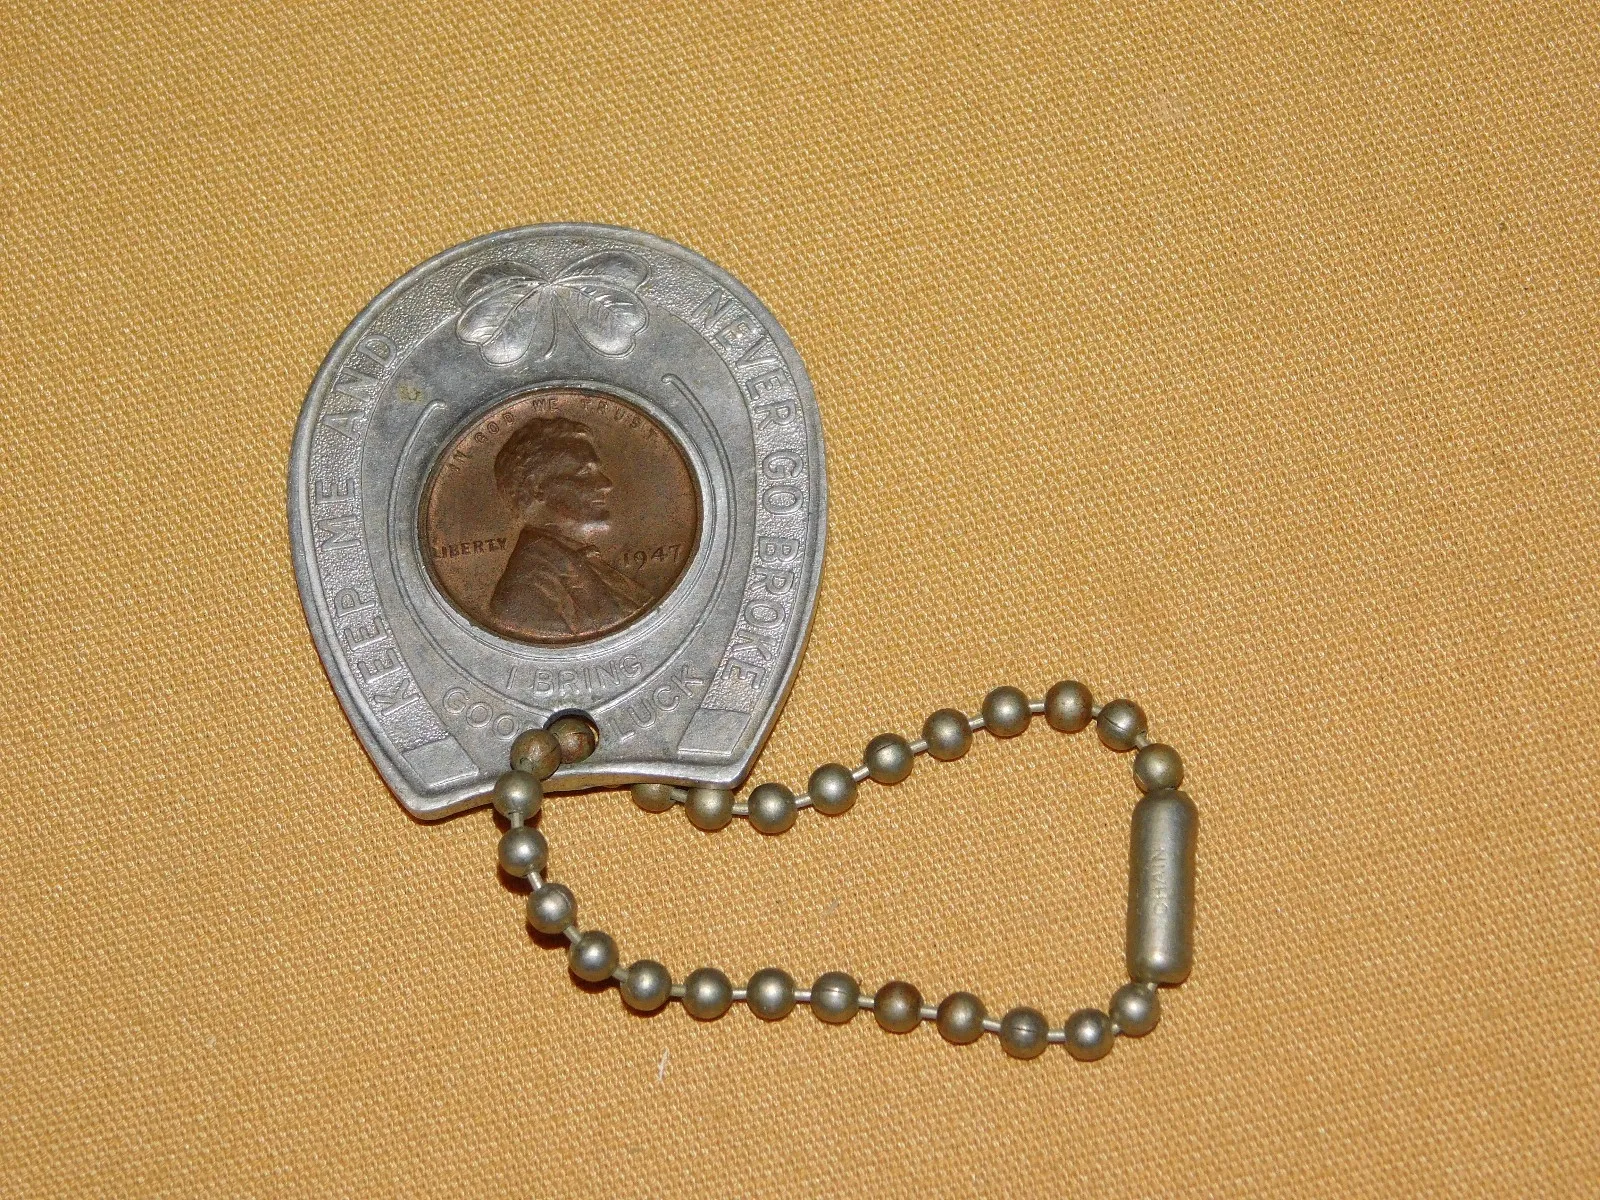 1947 US CENT GOOD LUCK PENNY STANDARD HORSE NAIL CORP NEW BRIGHTON PA KEYCHAIN